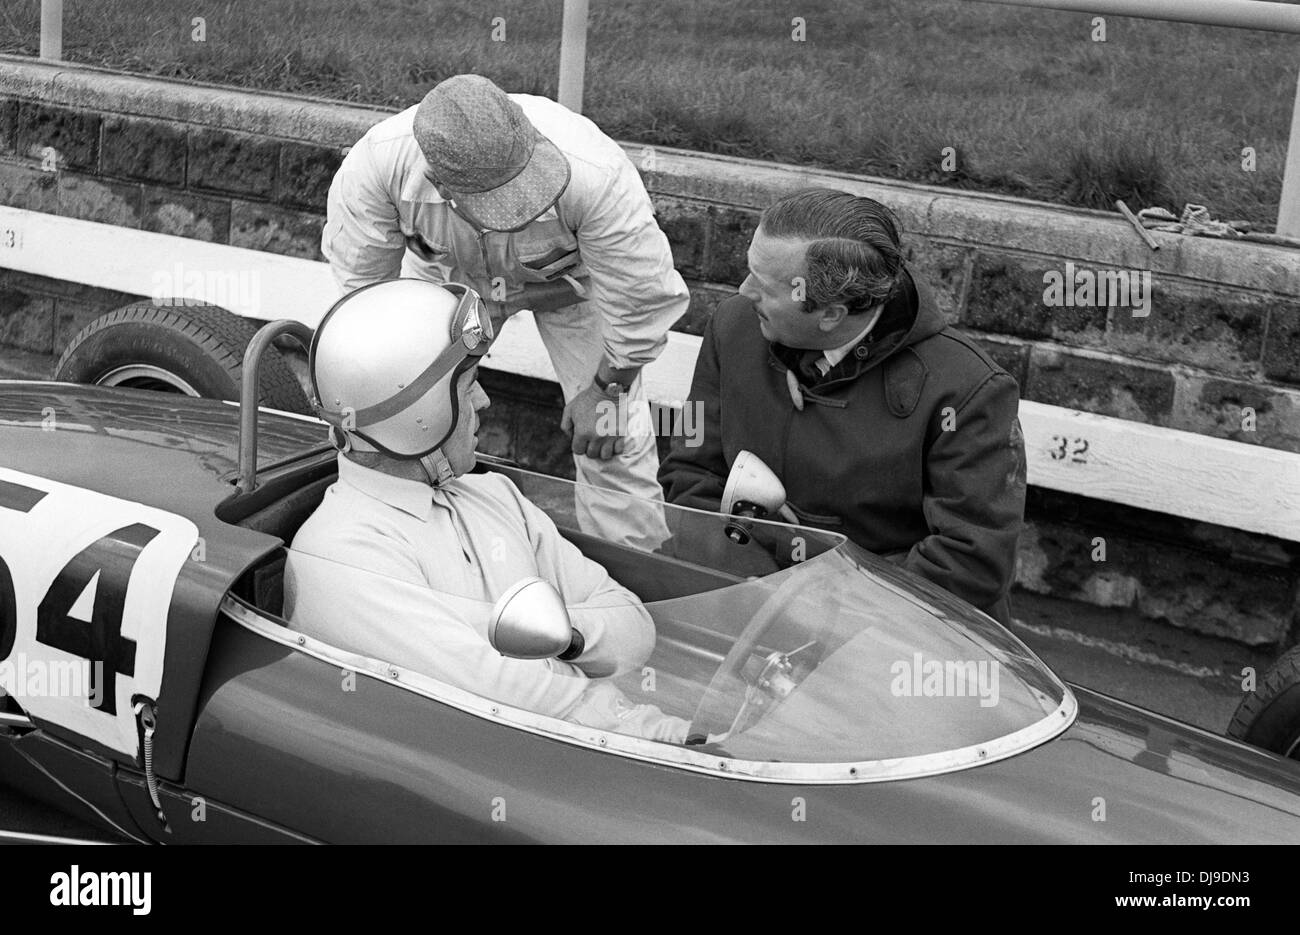 Colin Chapman with Jim Russell in a Lotus 20 Formula Junior in the XVI BARC Aintree 200 race. England 22 April 1961. Stock Photo